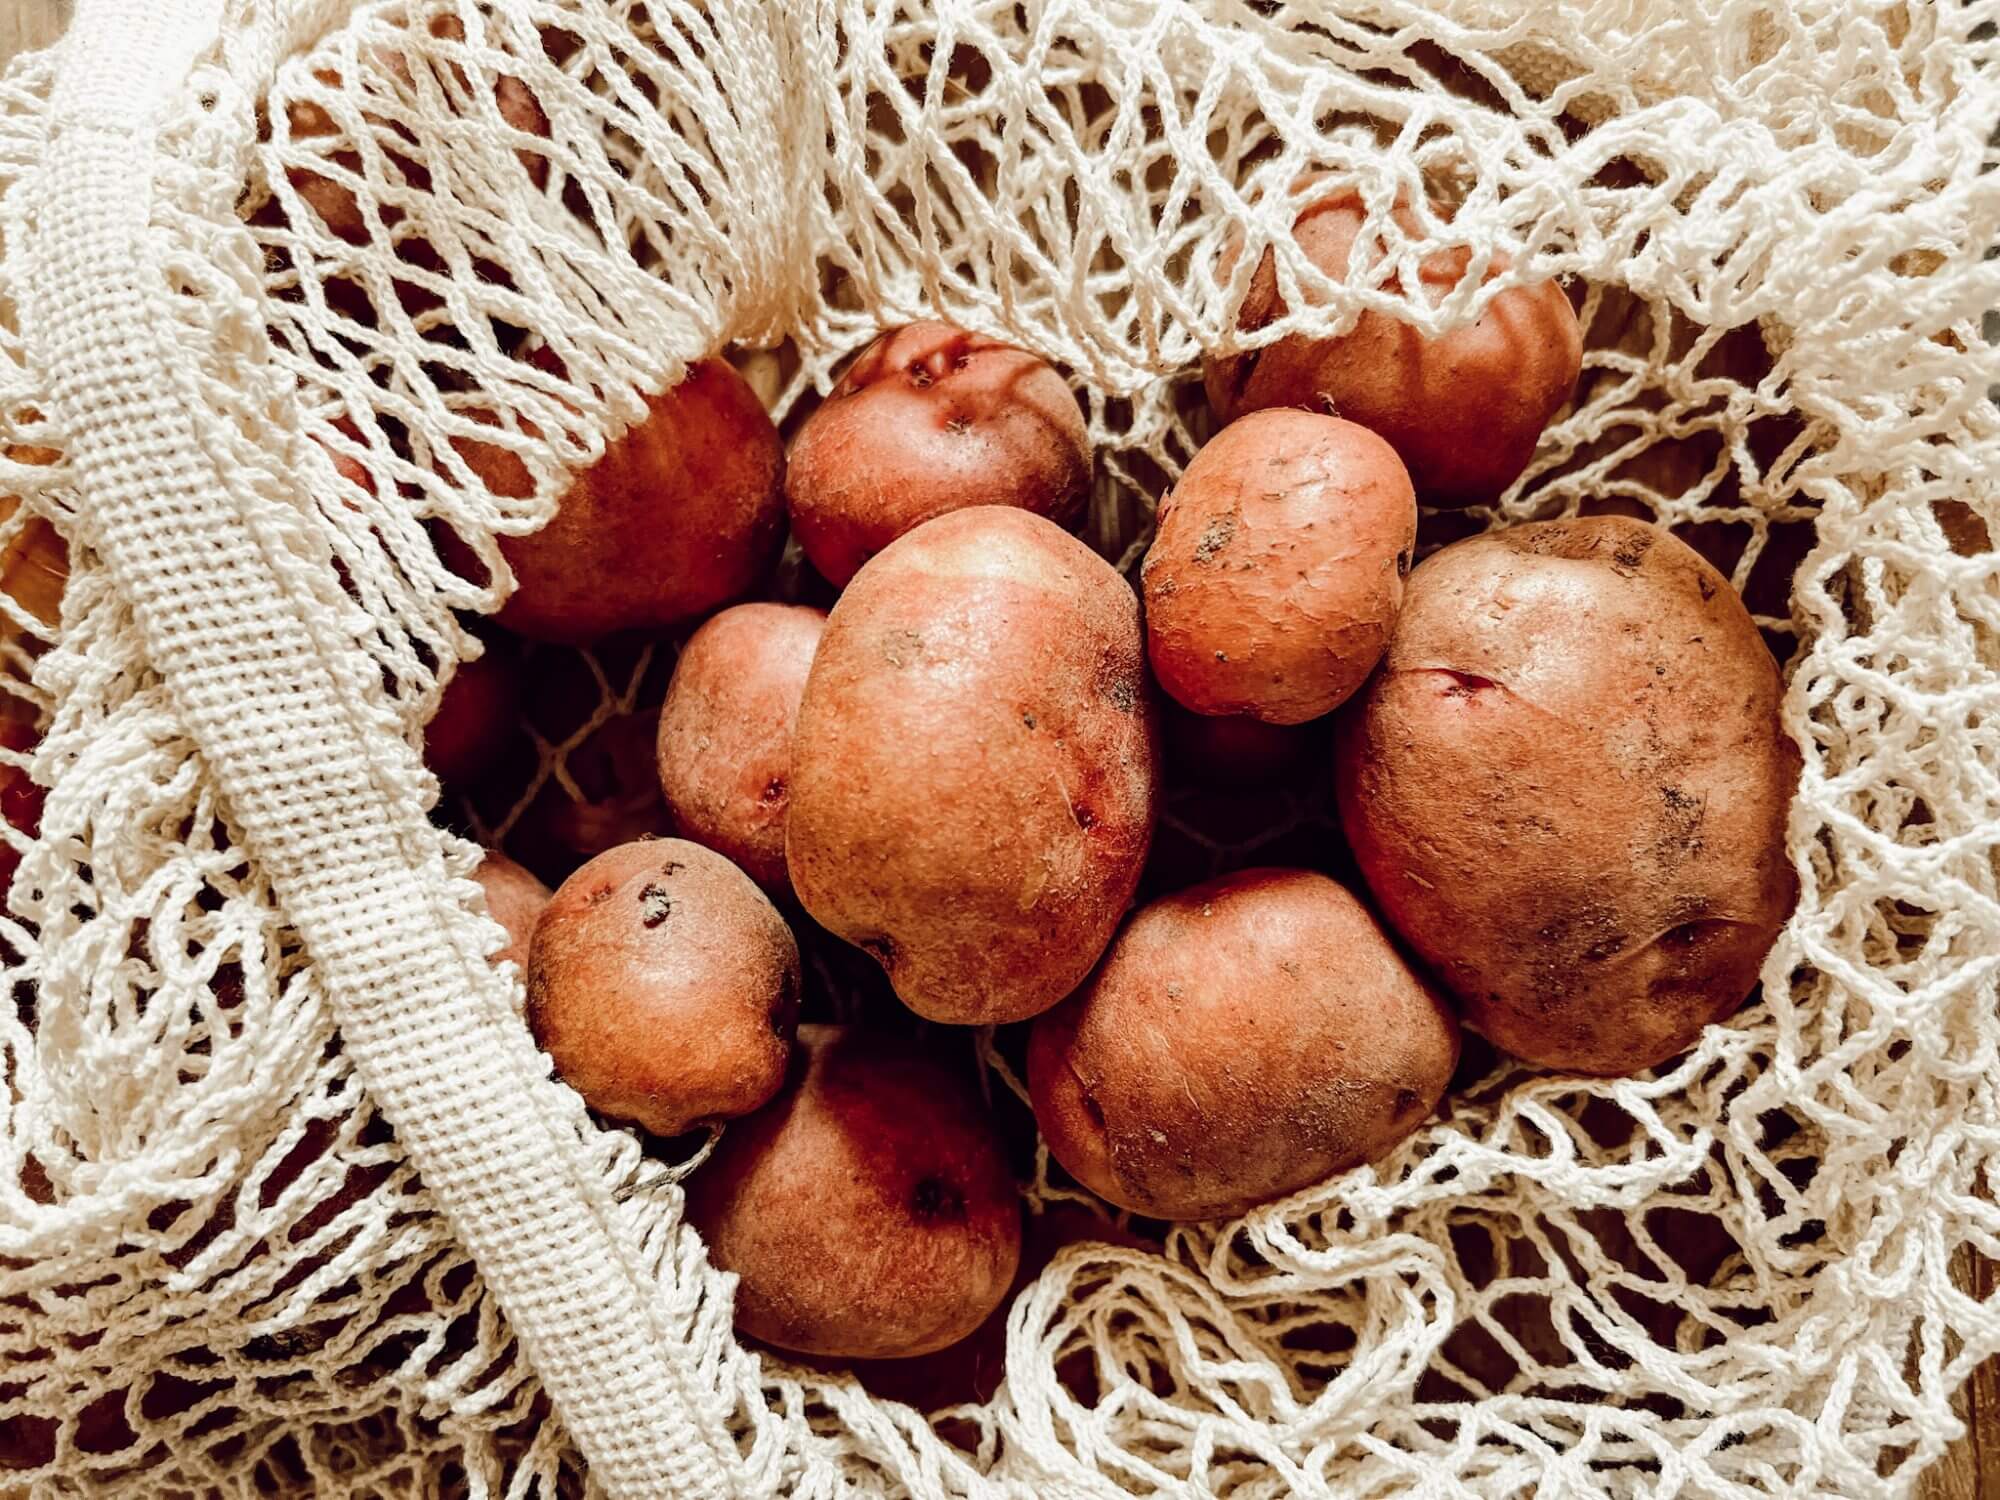 How to Garden in Grow Bags for Potatoes, Carrots and More